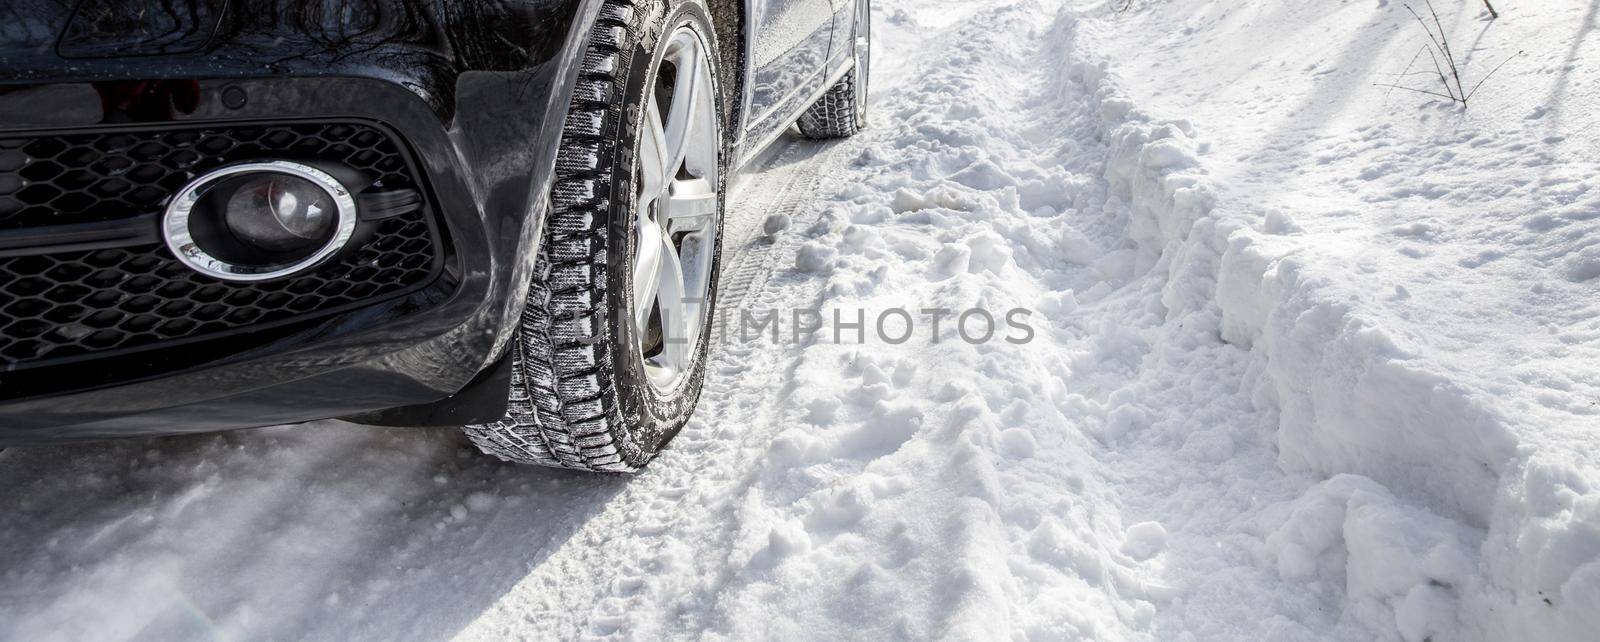 Driving car in winter with much snow by Mariakray